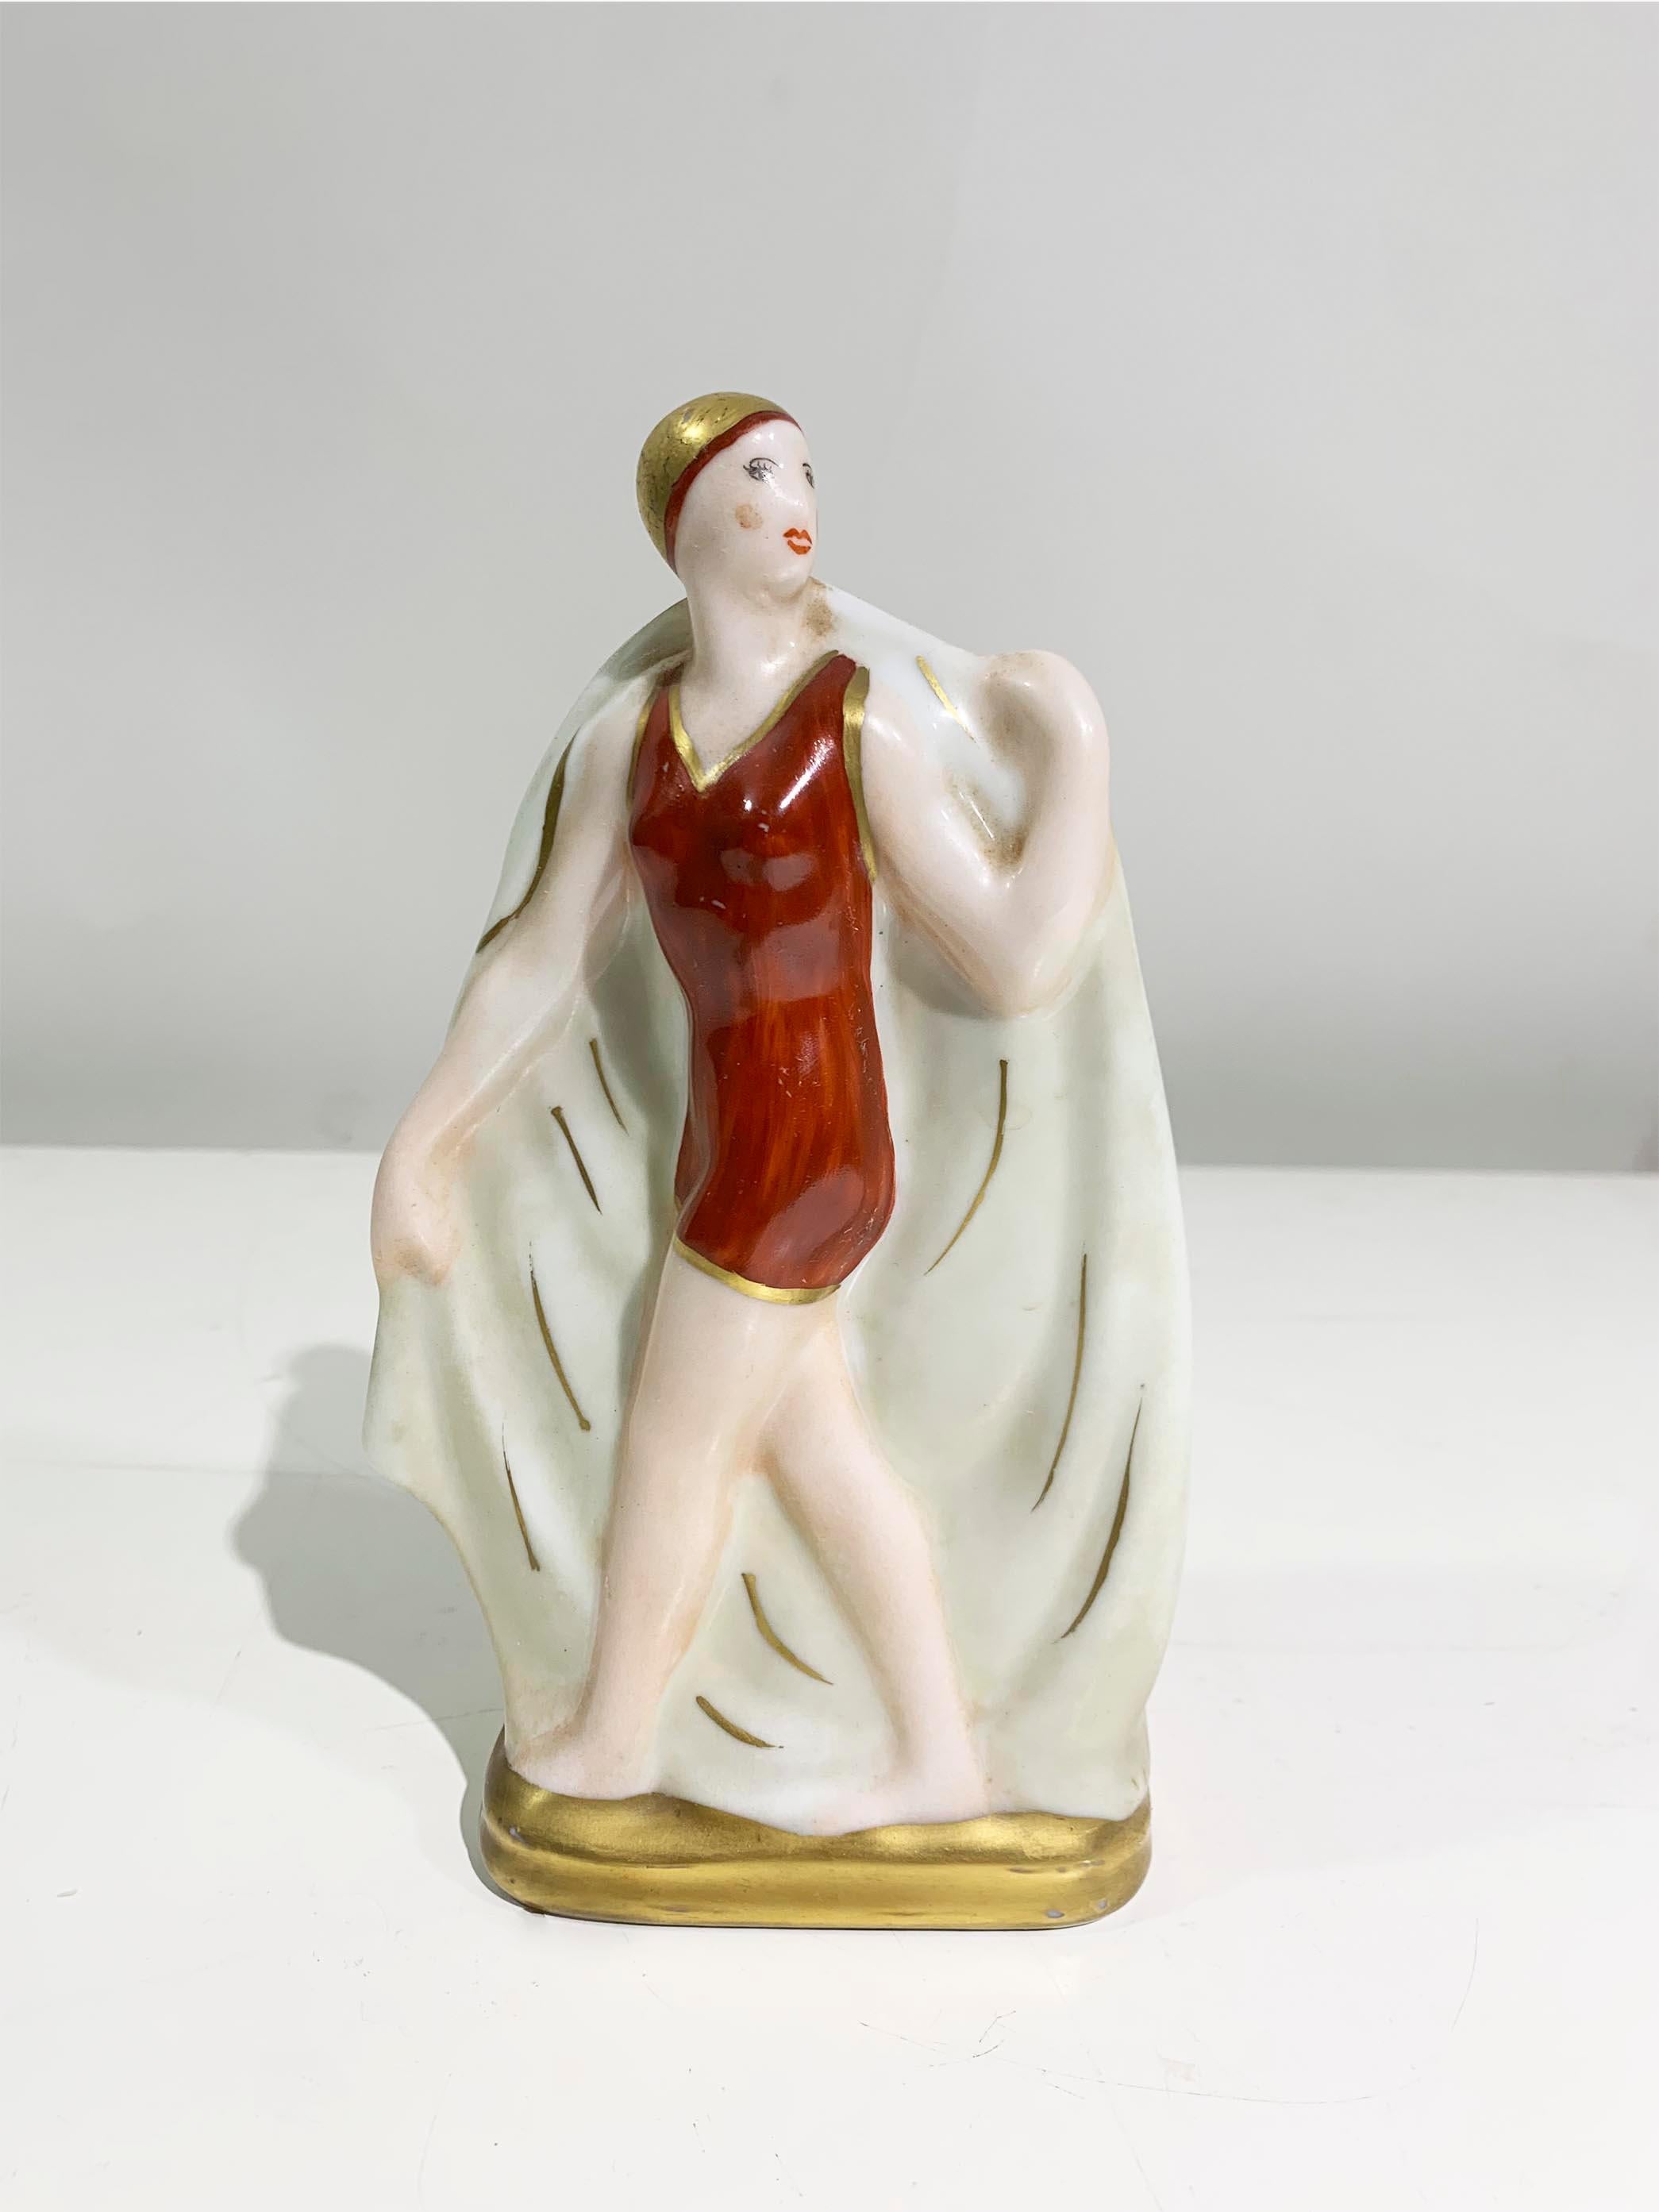 Art Deco Figurines in Limoges porcelain, featuring a depiction of 2 young women swimmers adorned in a classic bathing suit featuring a more fitted and tailored look compared to the loose and boxy styles of the previous decades. 
In a playful